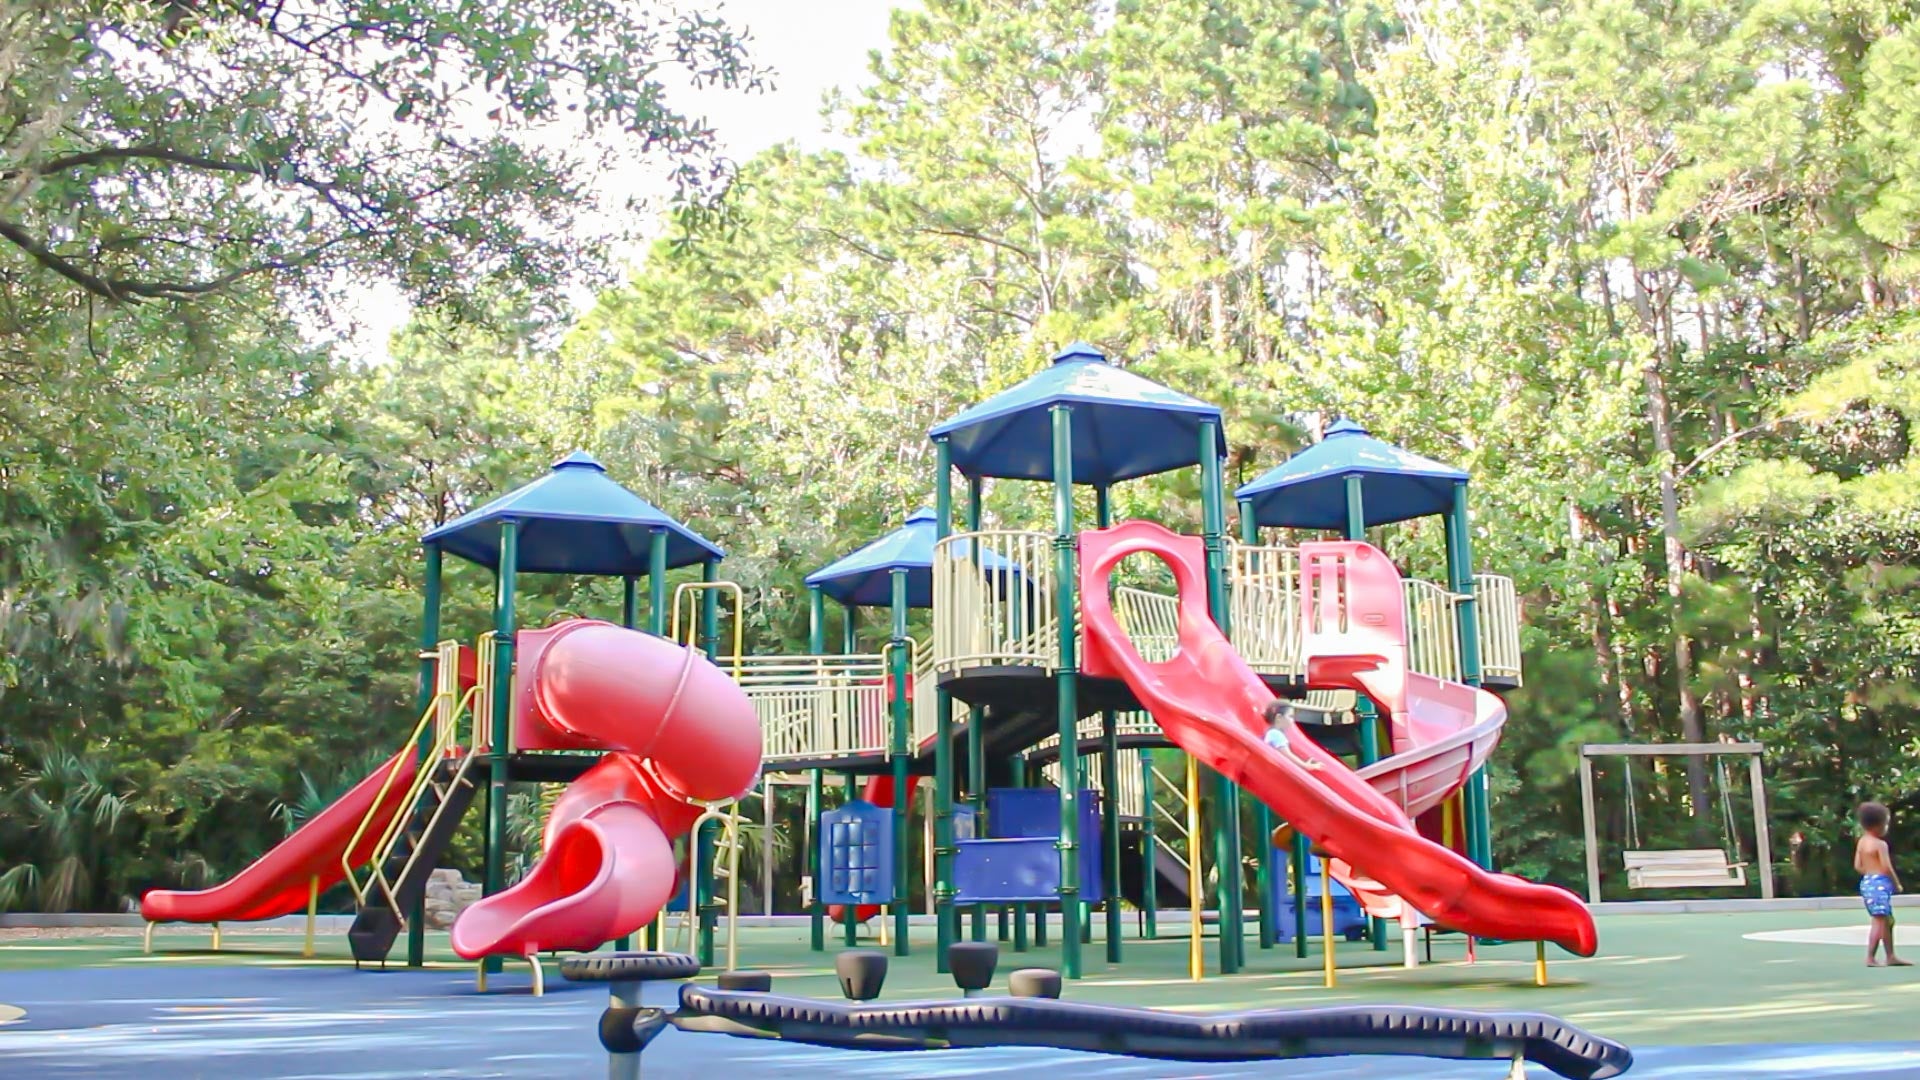 The playground at James Island County Park is huge. So much fun for the kids.